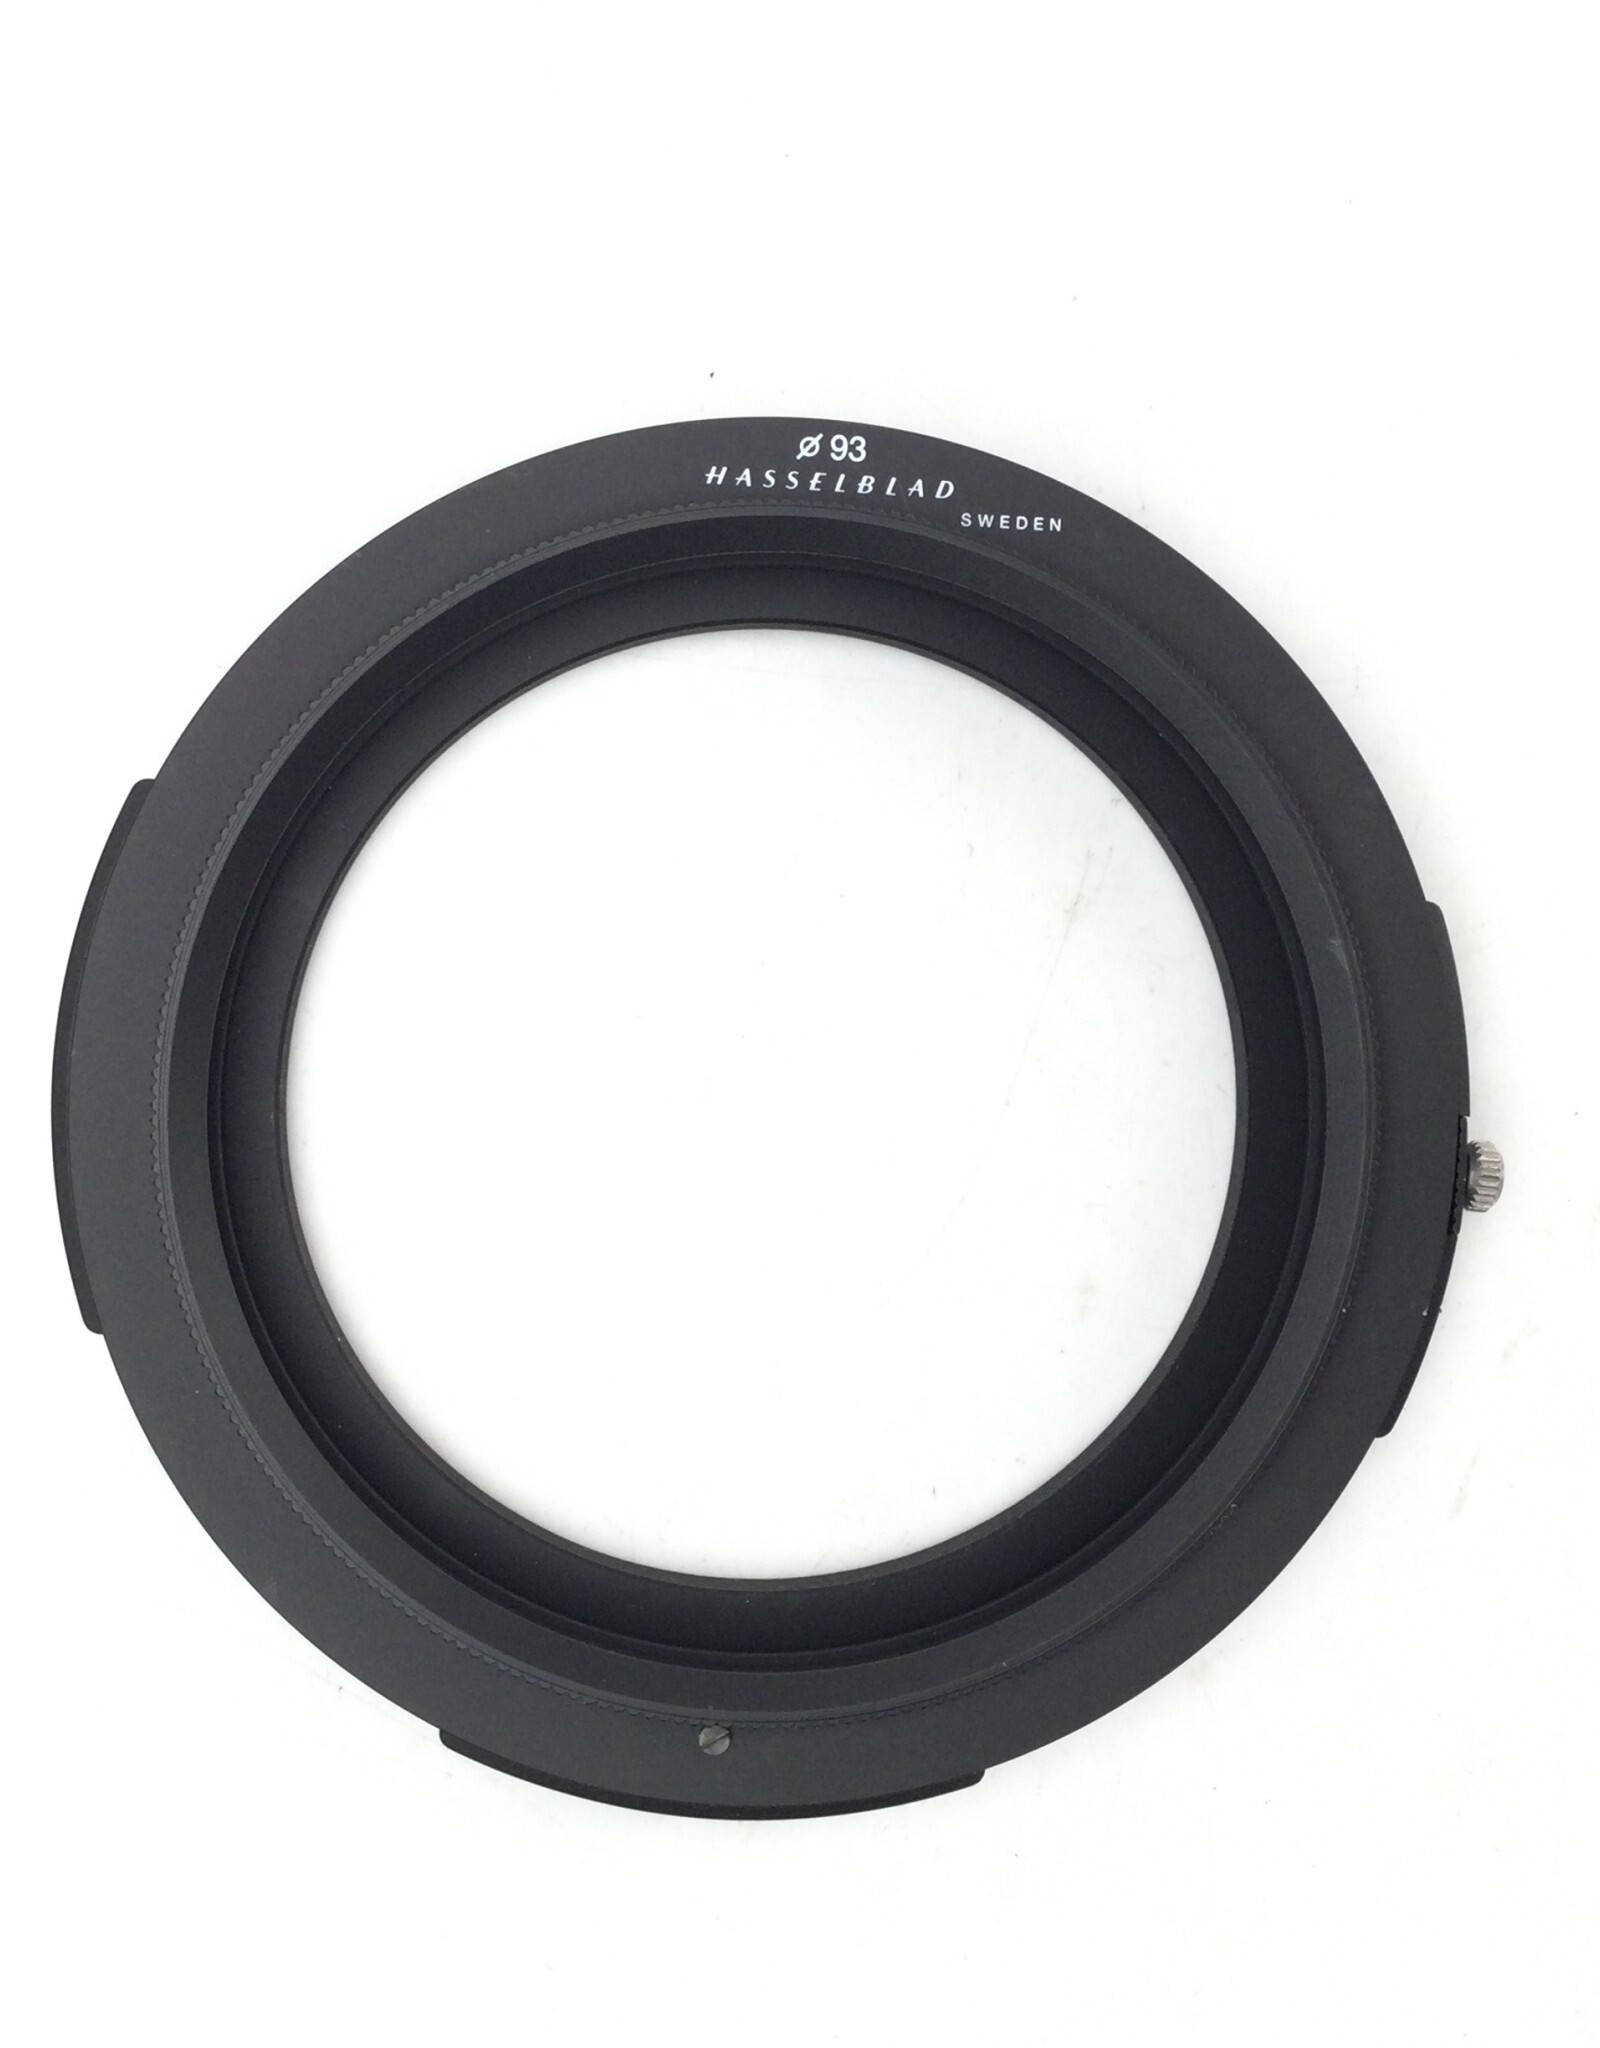 Hasselblad Hasselblad Lens Mounting Ring Bay 93 40720 Used Good